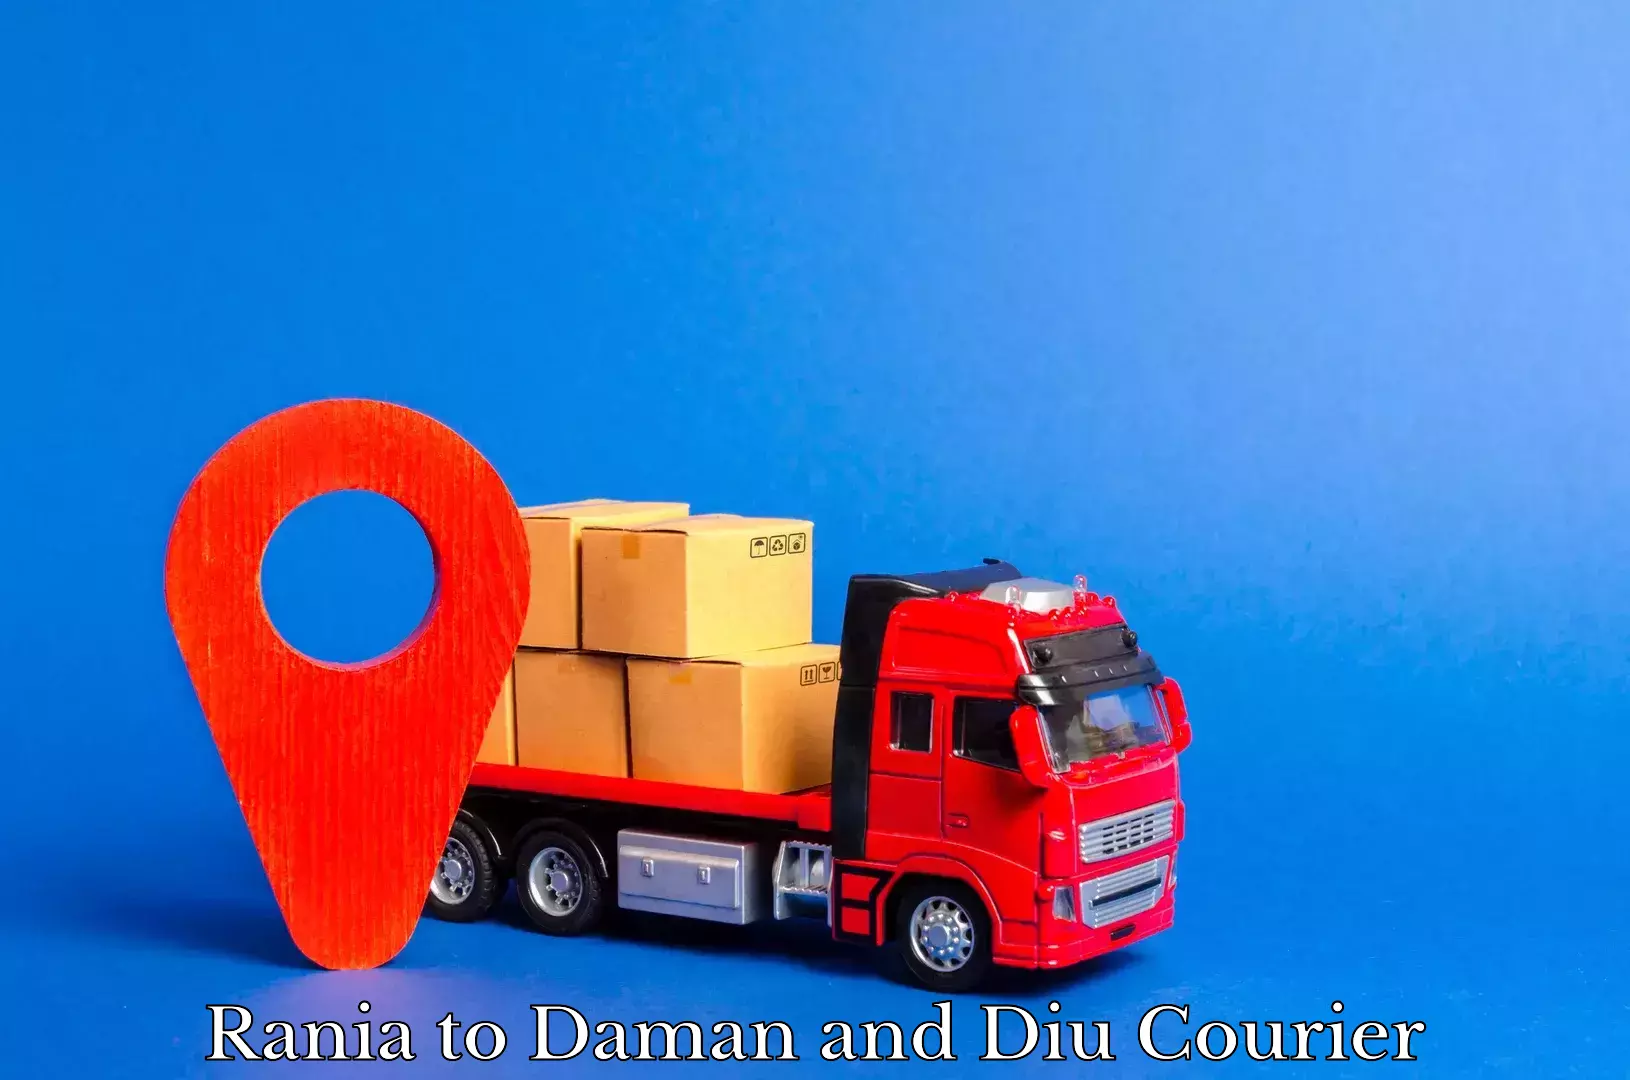 User-friendly courier app Rania to Daman and Diu